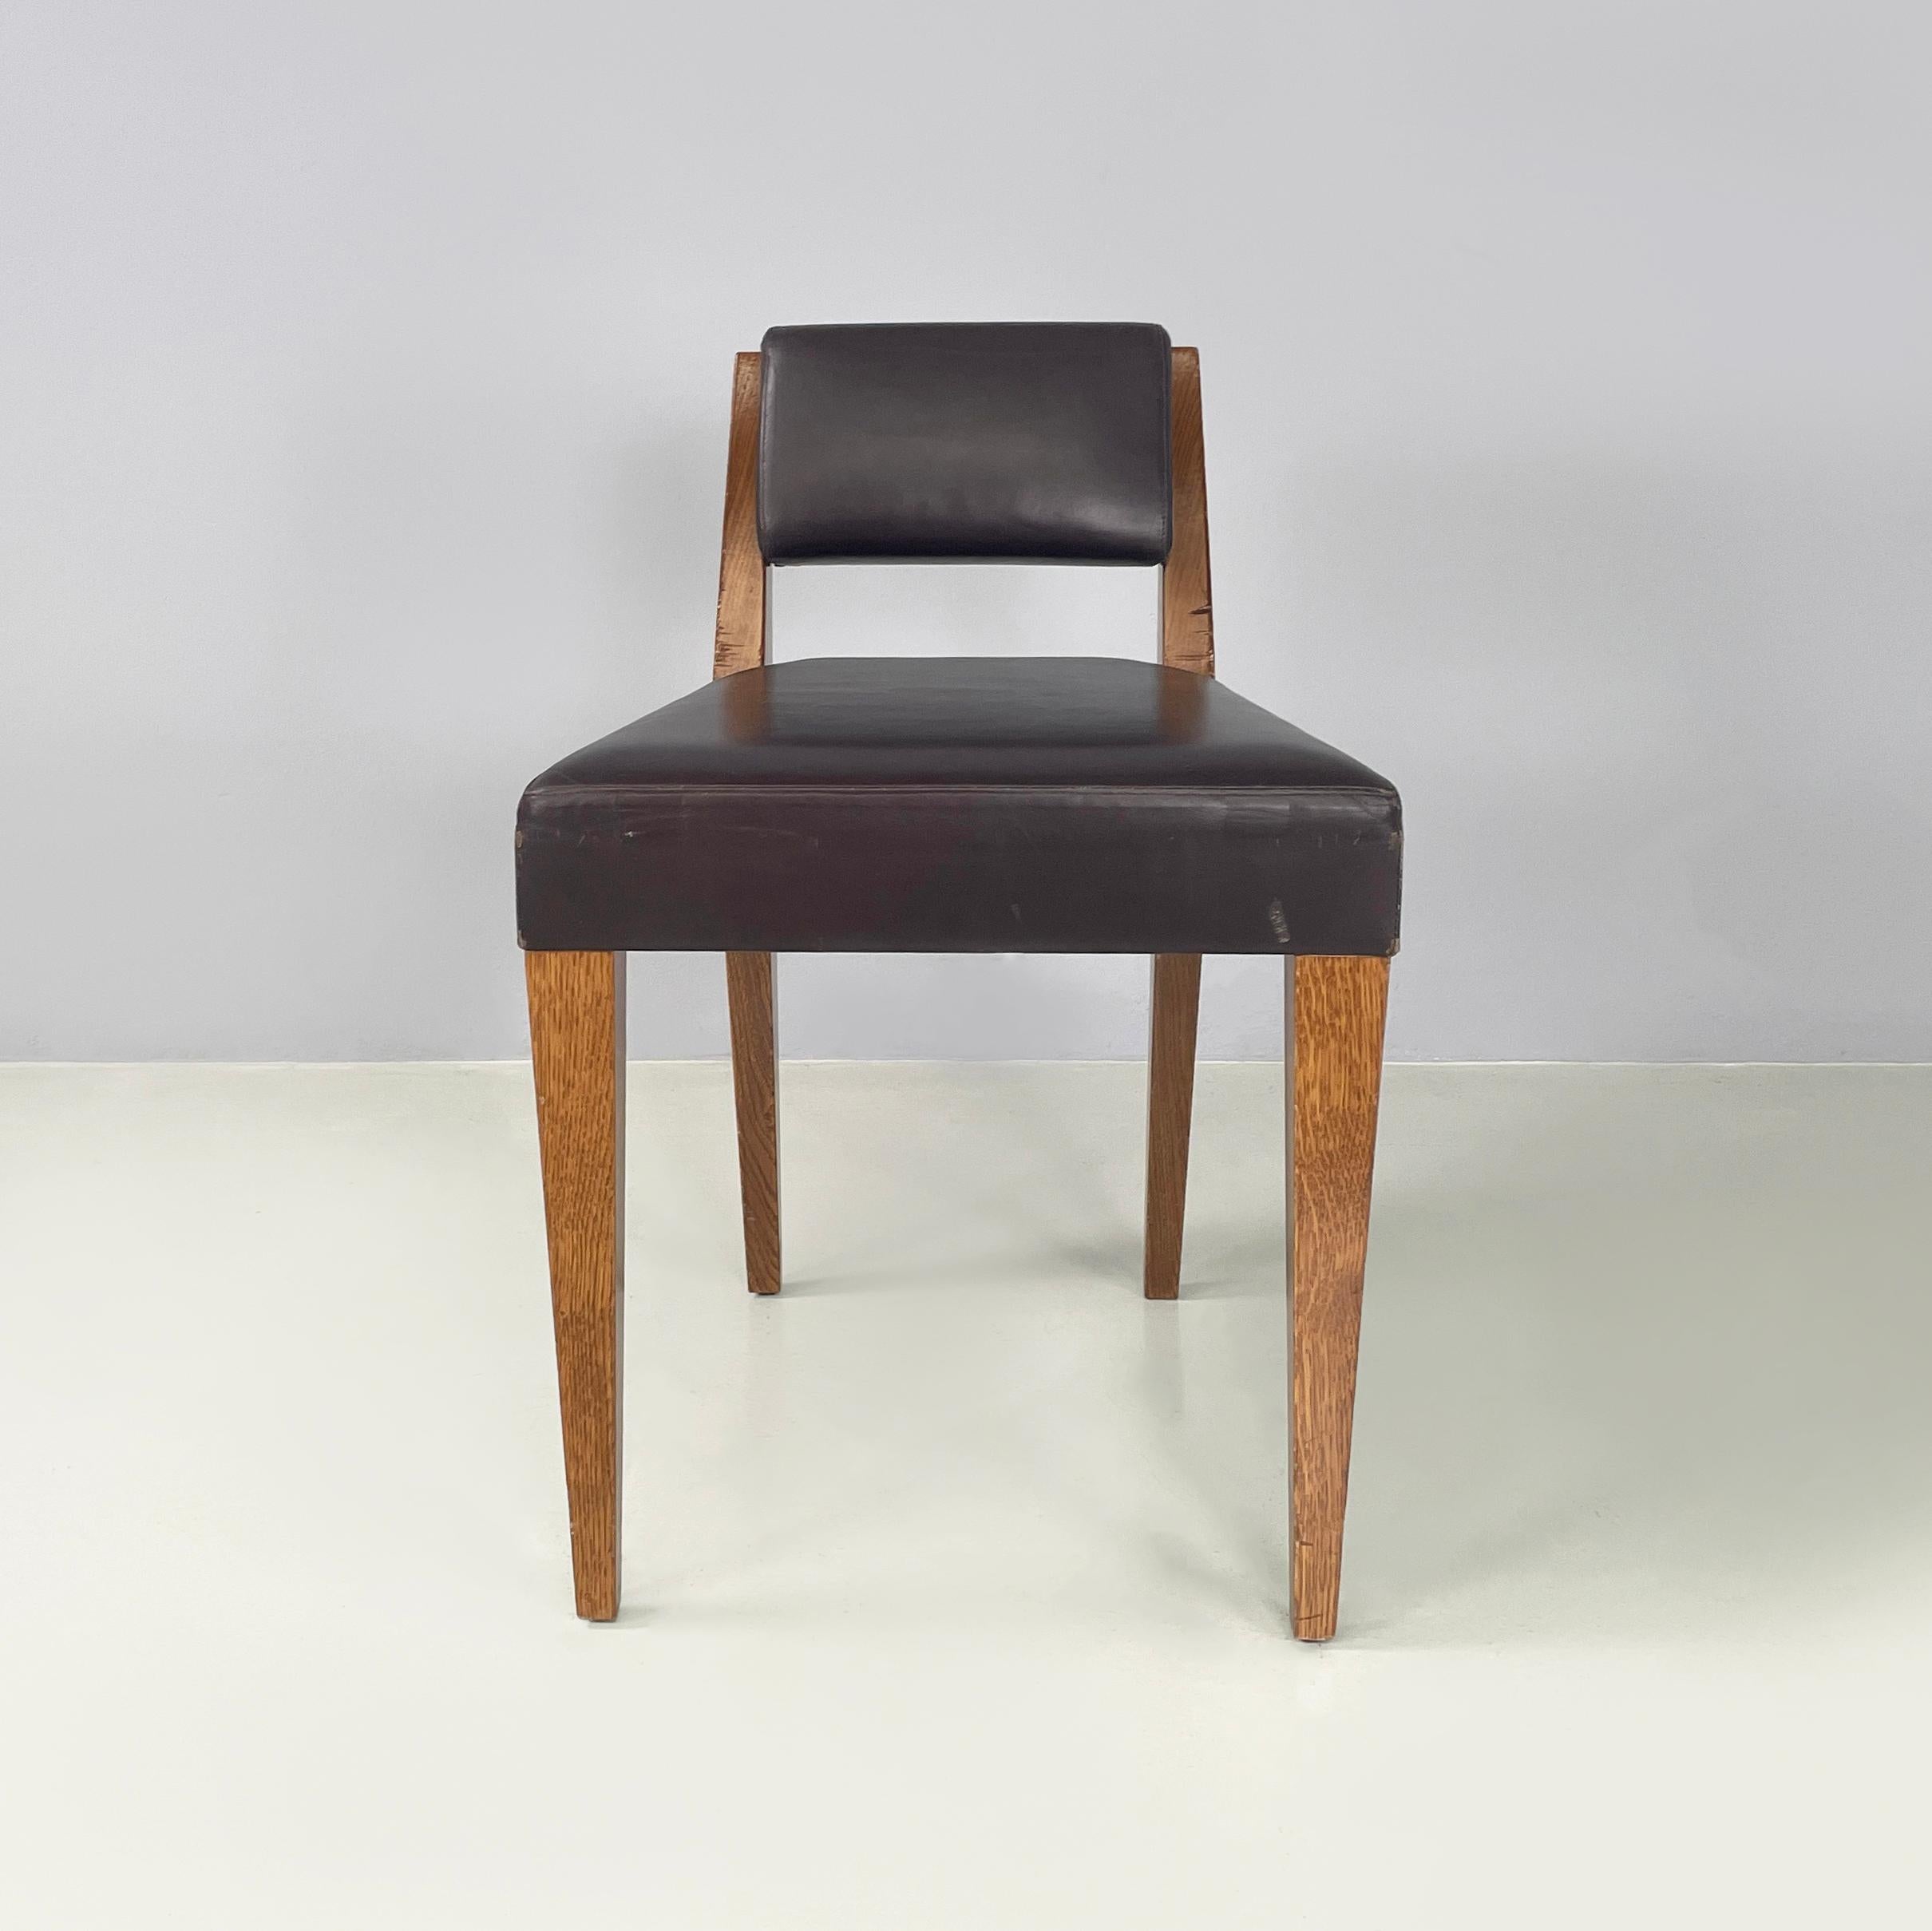 Italian modern Brown leather and wood chair by B&B, 1980s
Chair with square seat and backrest padded and covered in dark brown leather. The square section structure is made of wood.
Produced by B&B in 1980s. Logo present under the seat.
Vintage